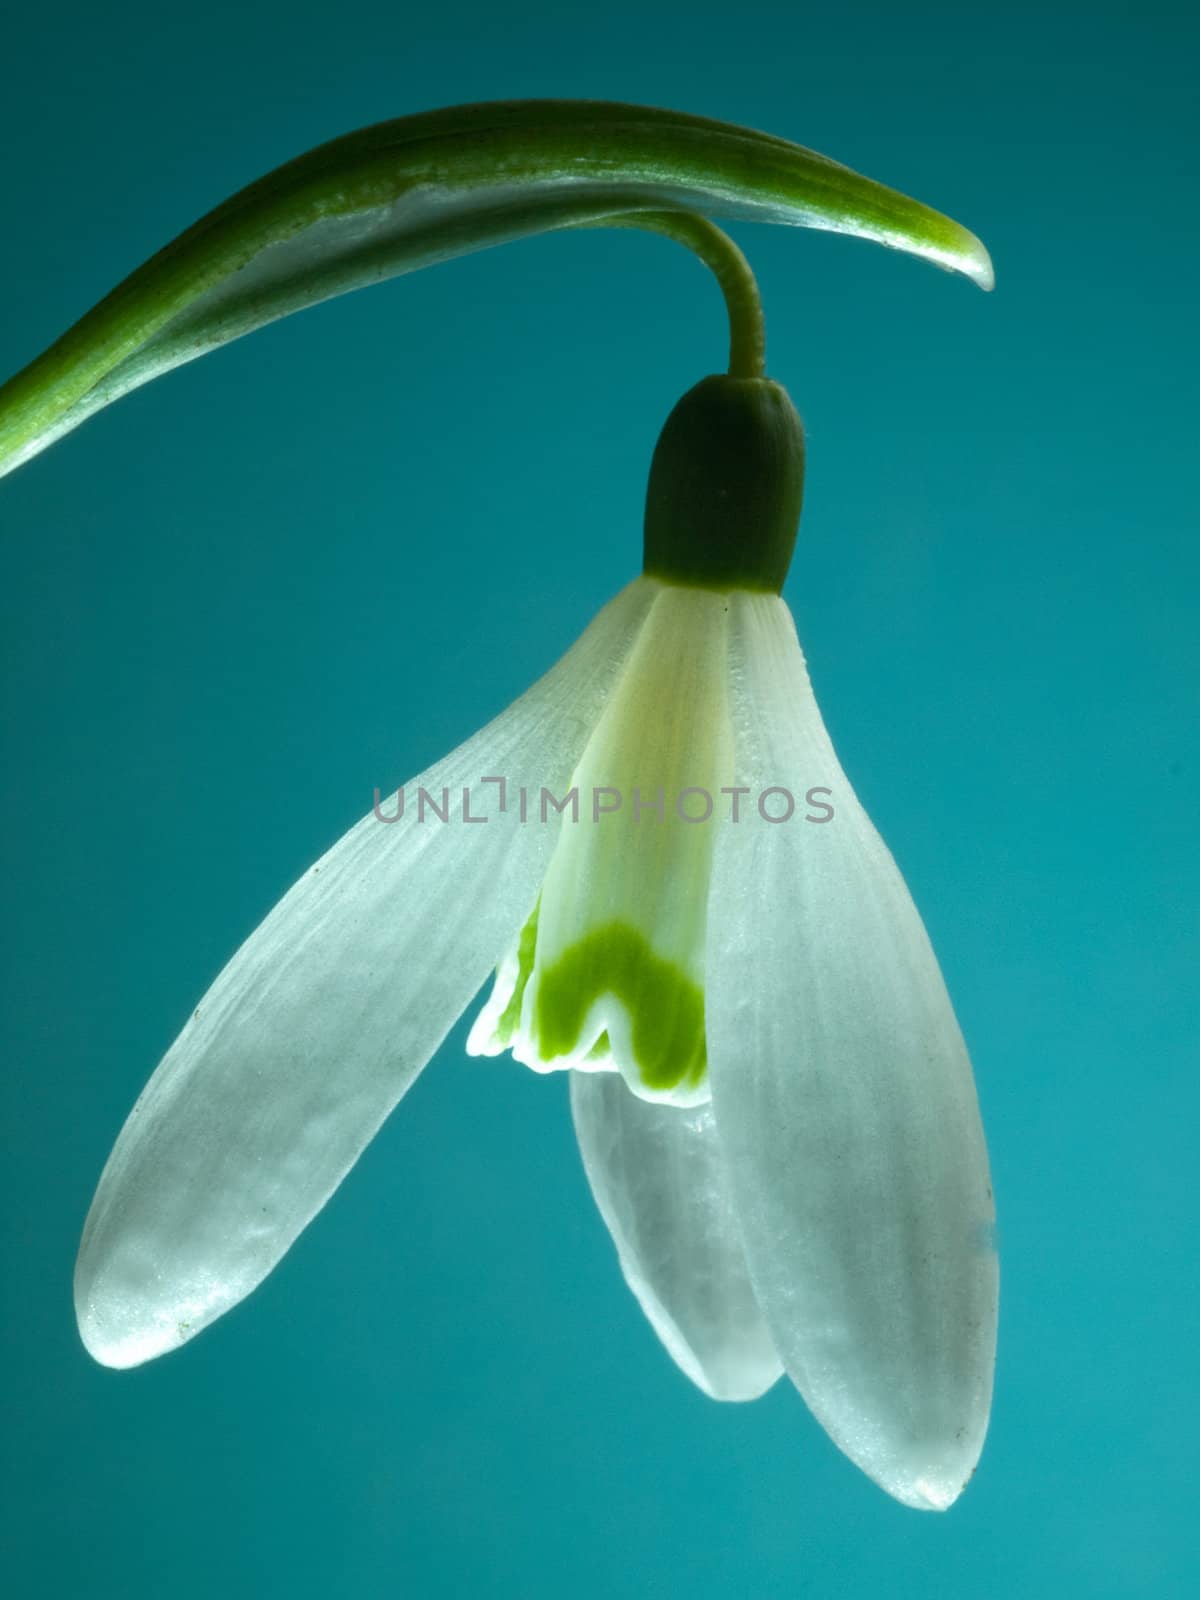 A single early spring Snowdrop by ianthwaites